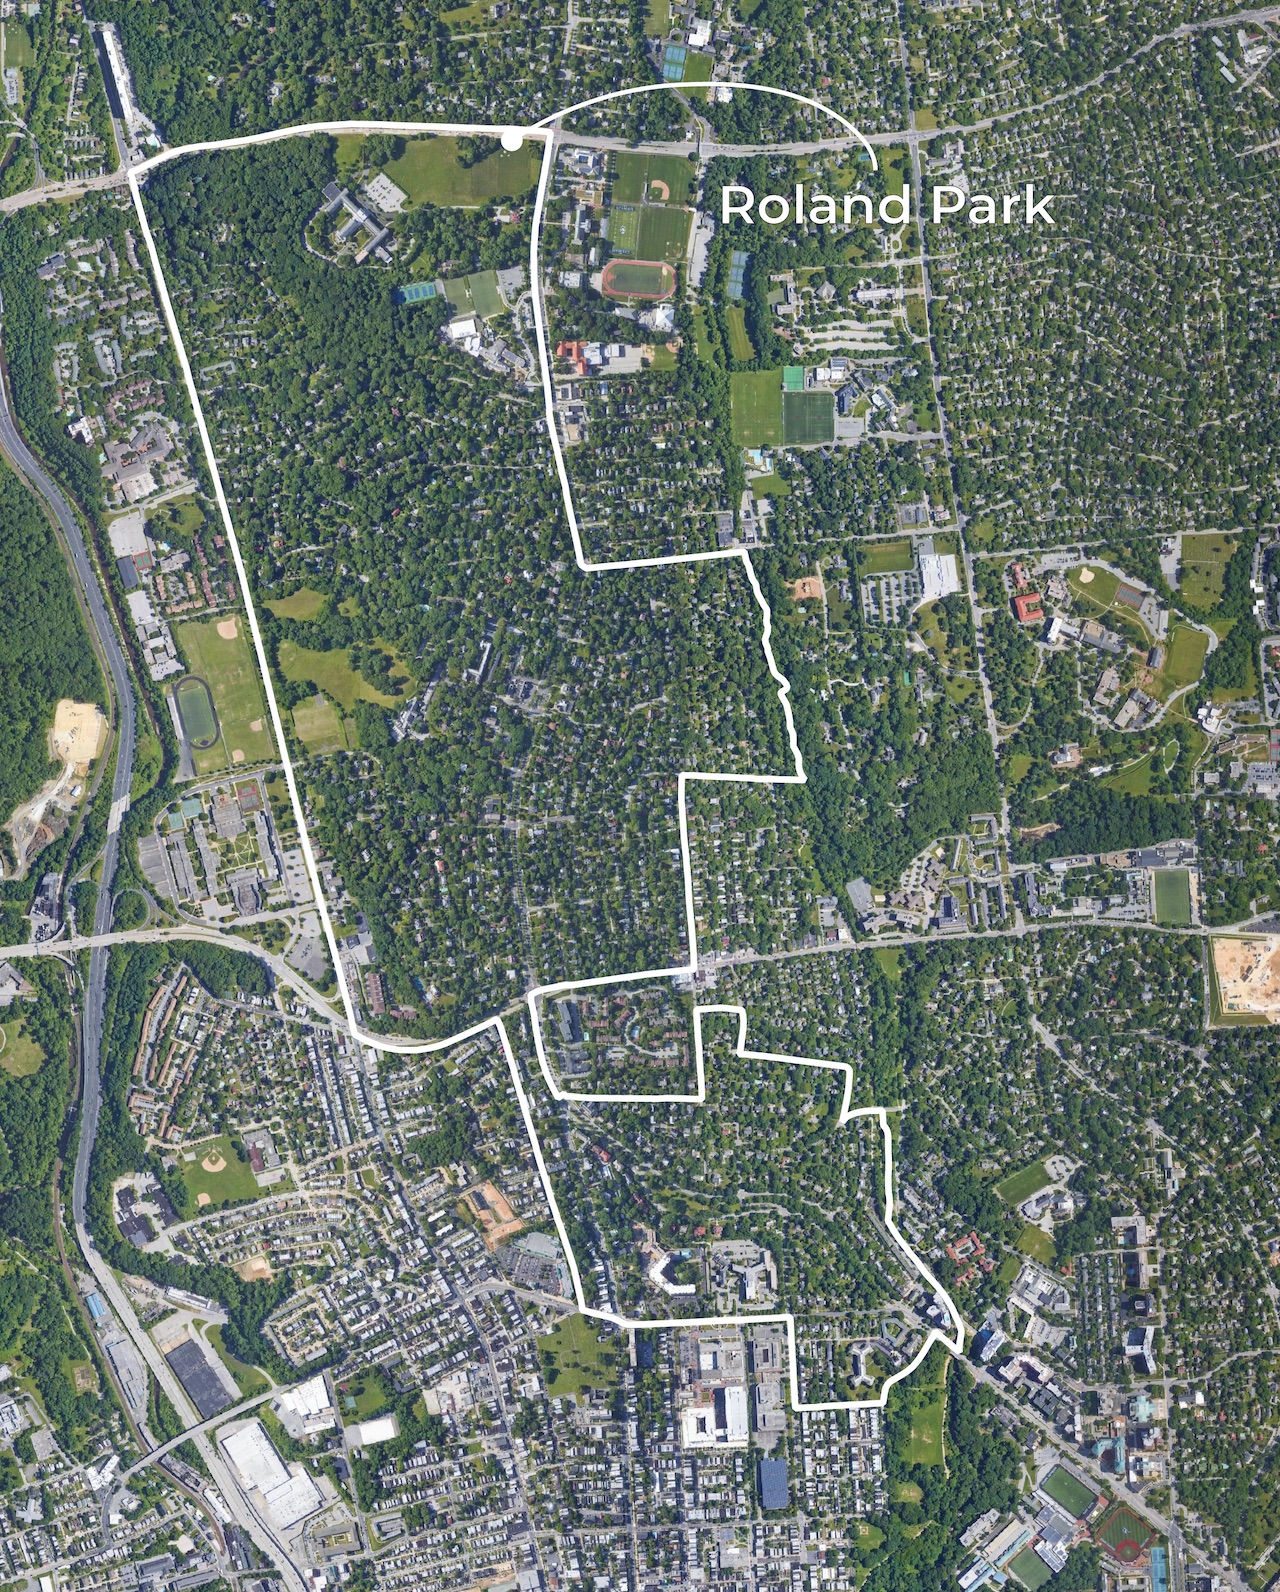 A slightly zoomed-in satellite photo of the Roland Park area